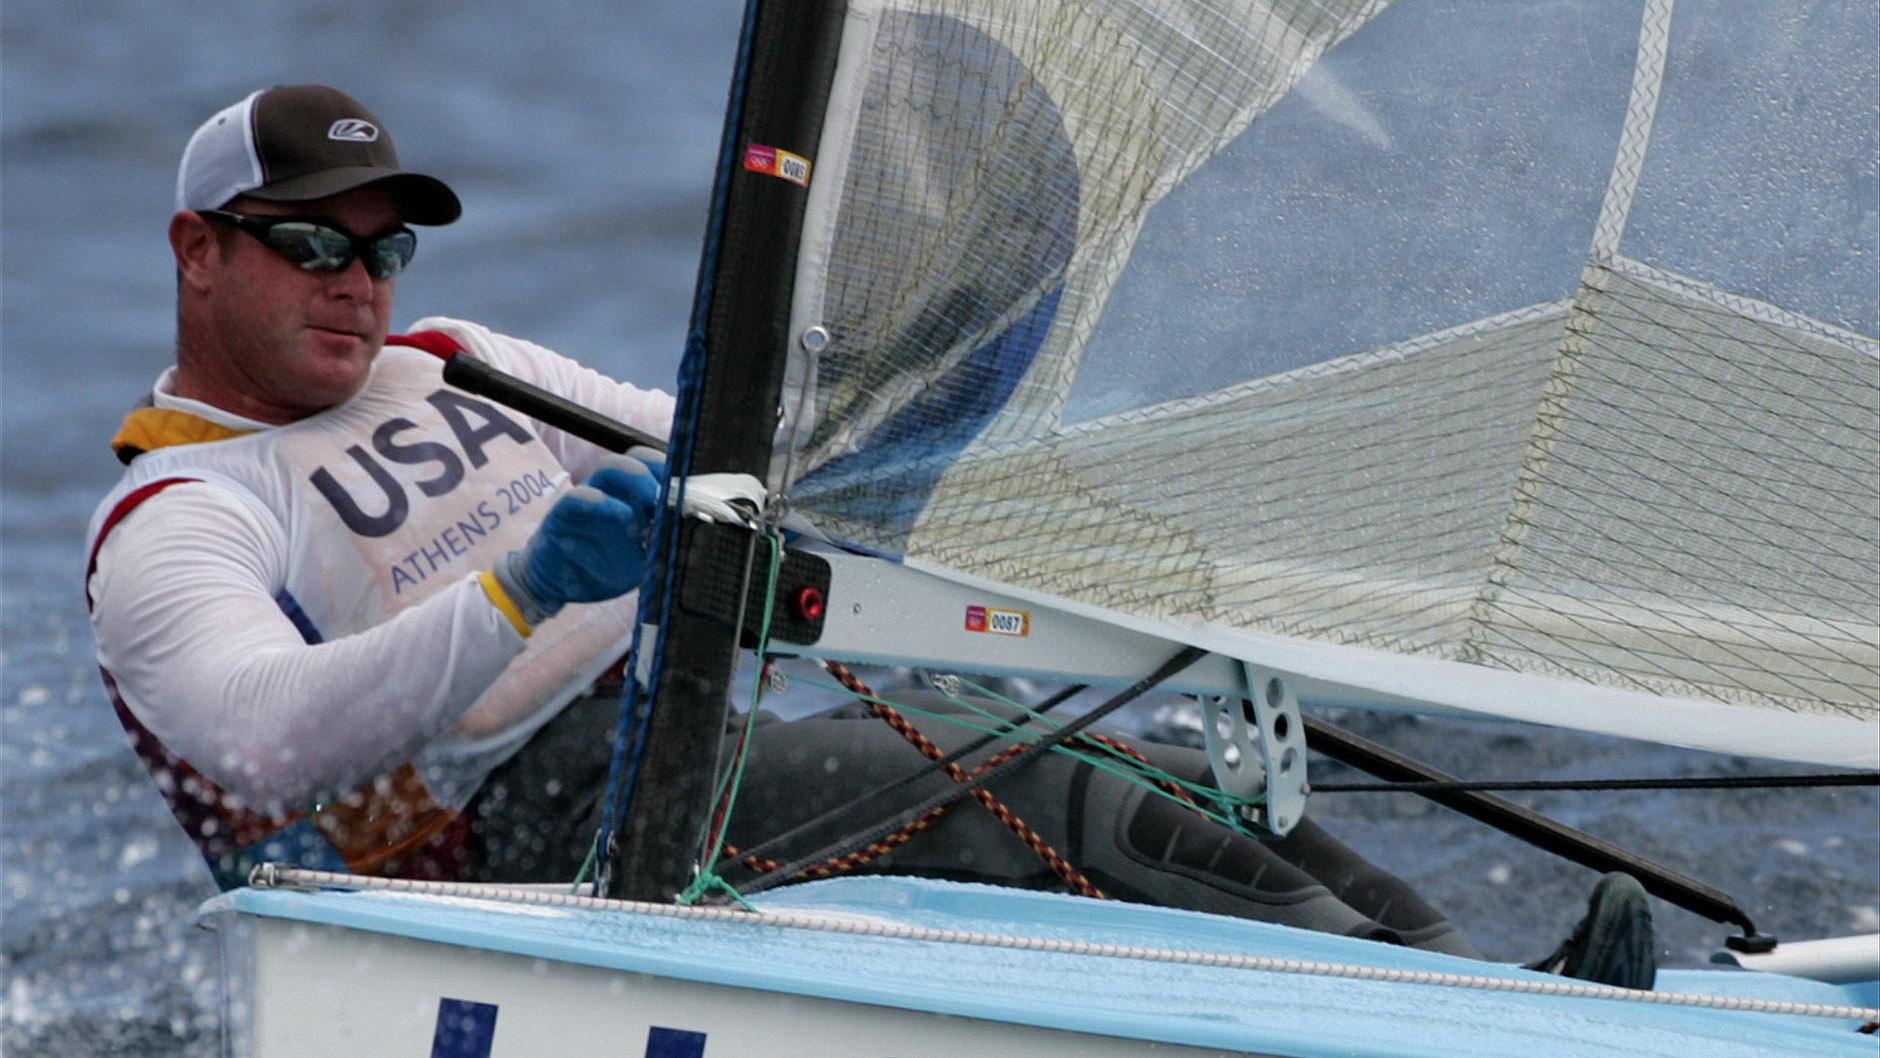 Kevin Hall sailing in the 2004 Olympic Games in Athens.